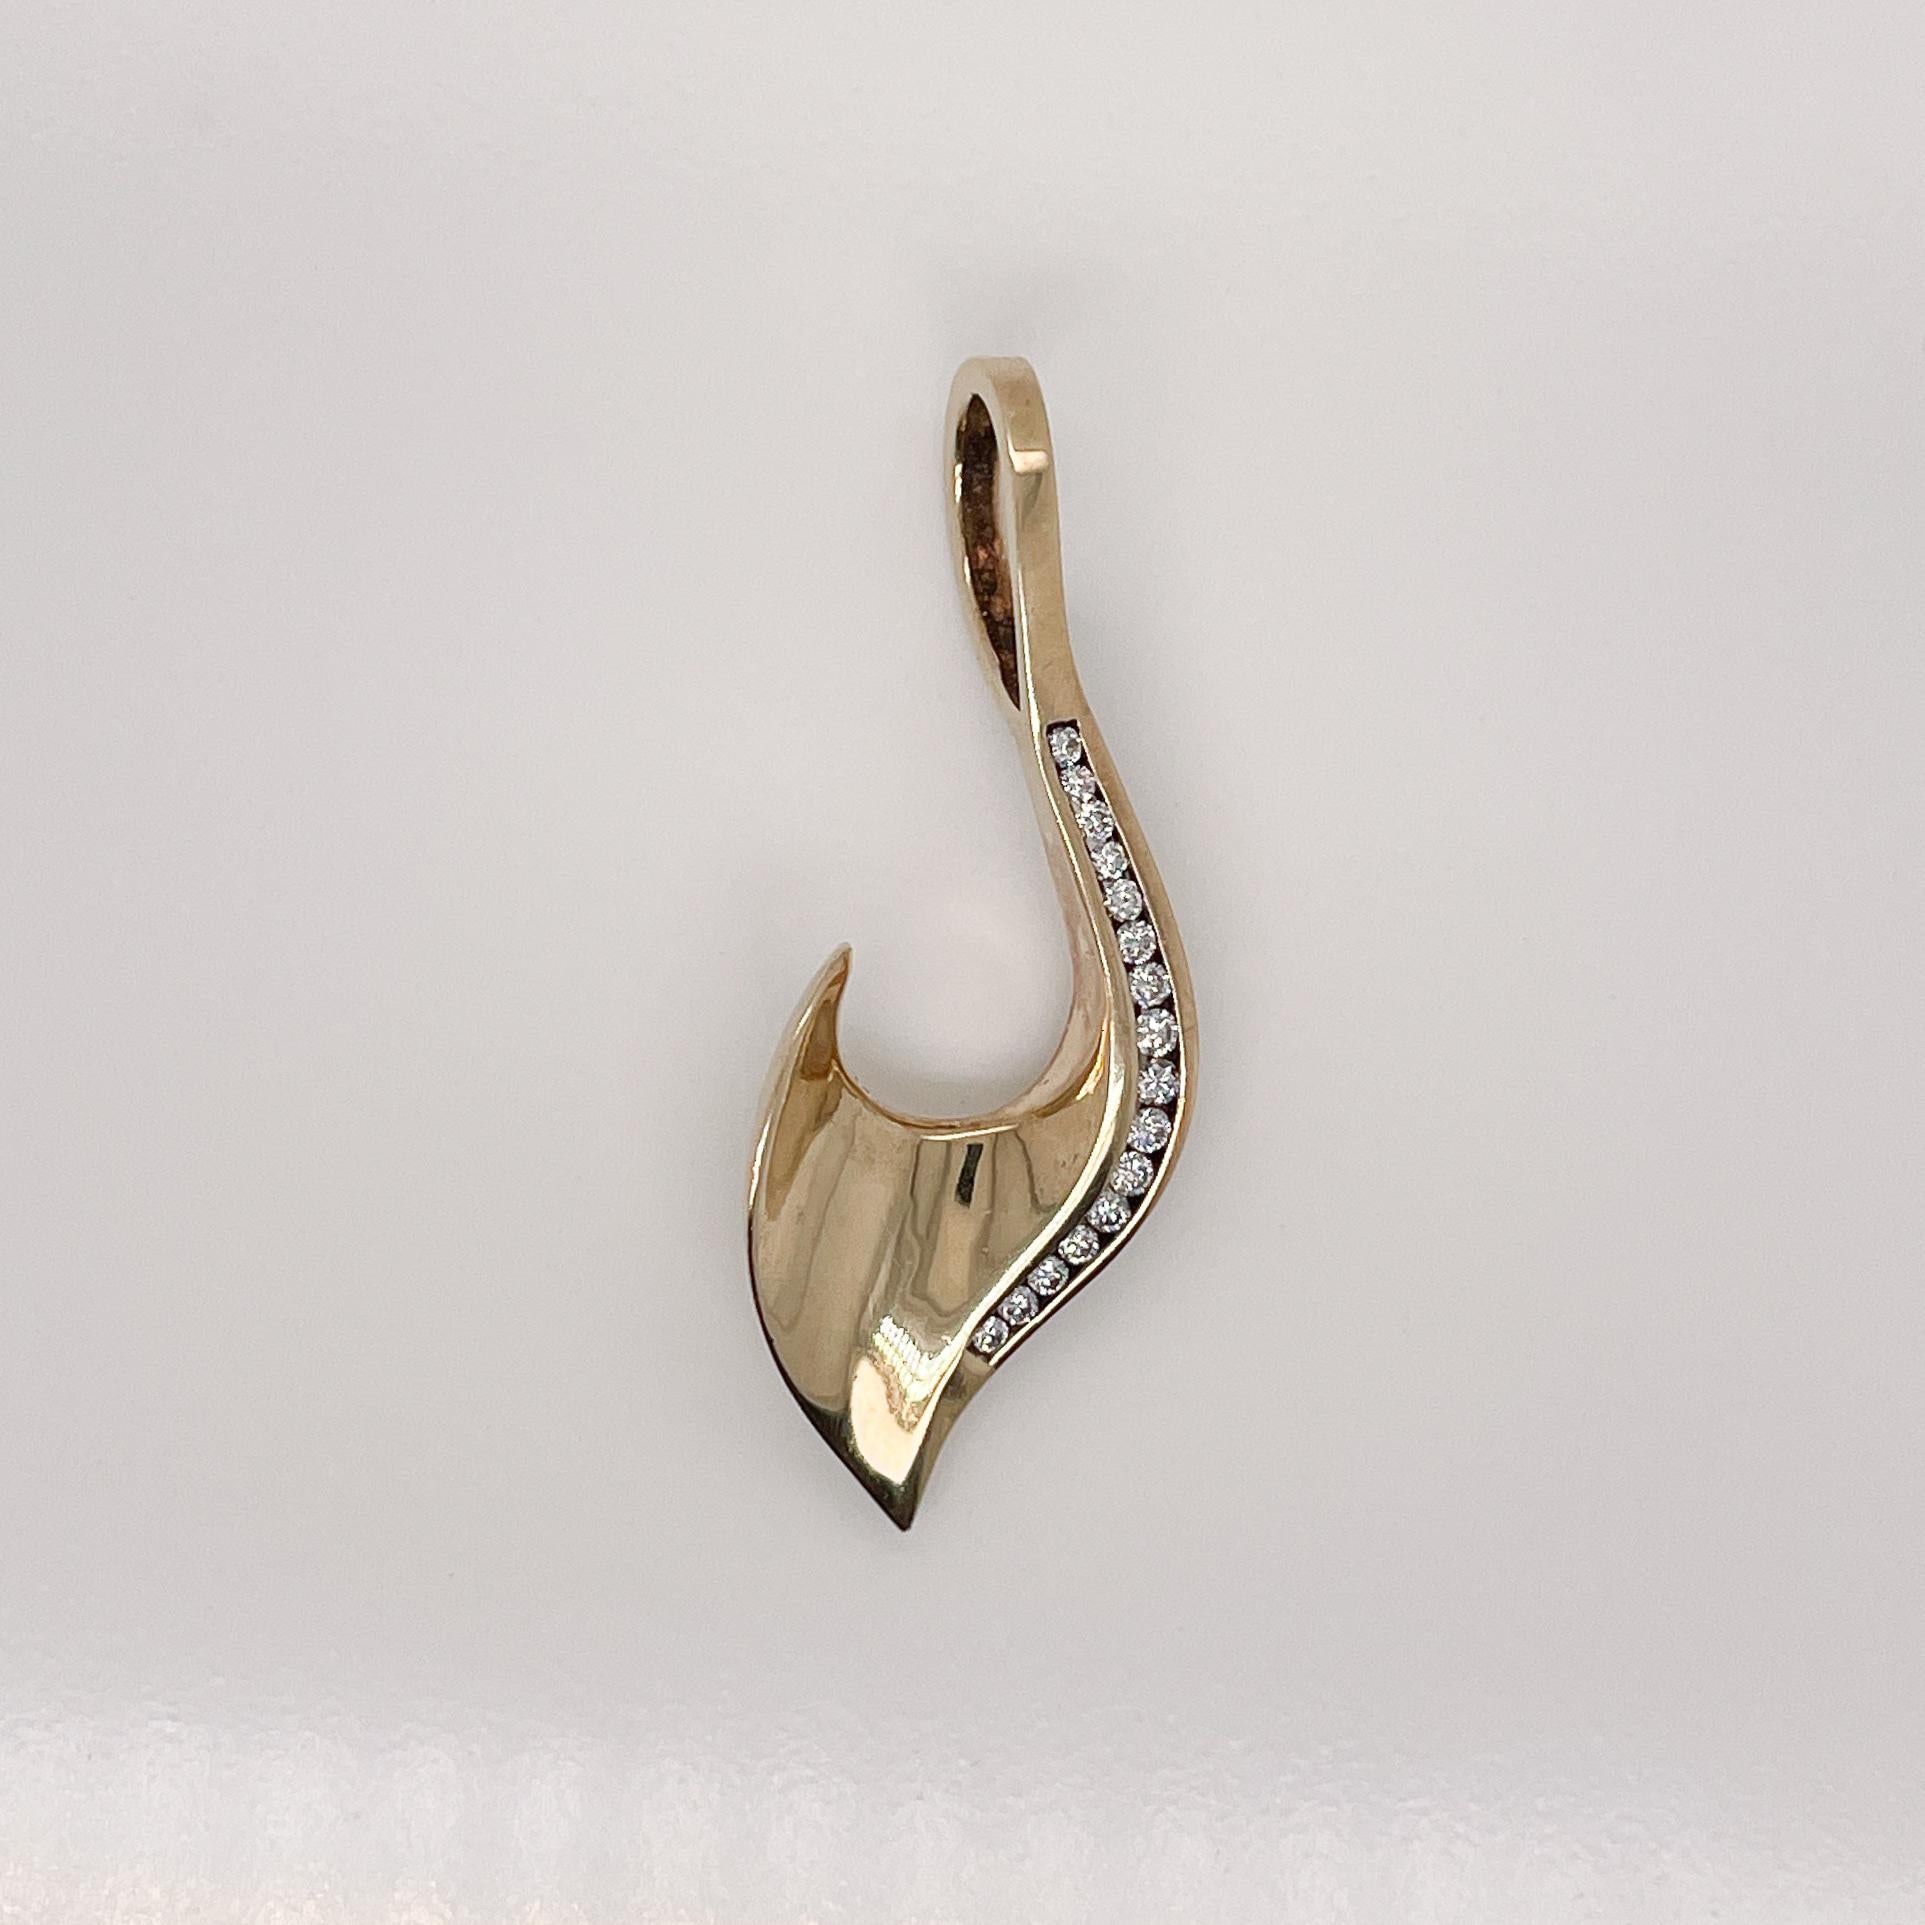 First Sentence: 
A very fine modernist gold and diamond pendant.

Comprised of a curved hook shape in 14k gold with channel set round brilliant diamonds. 

Simply an wonderful pendant!

(Chain for display purposes and not included with